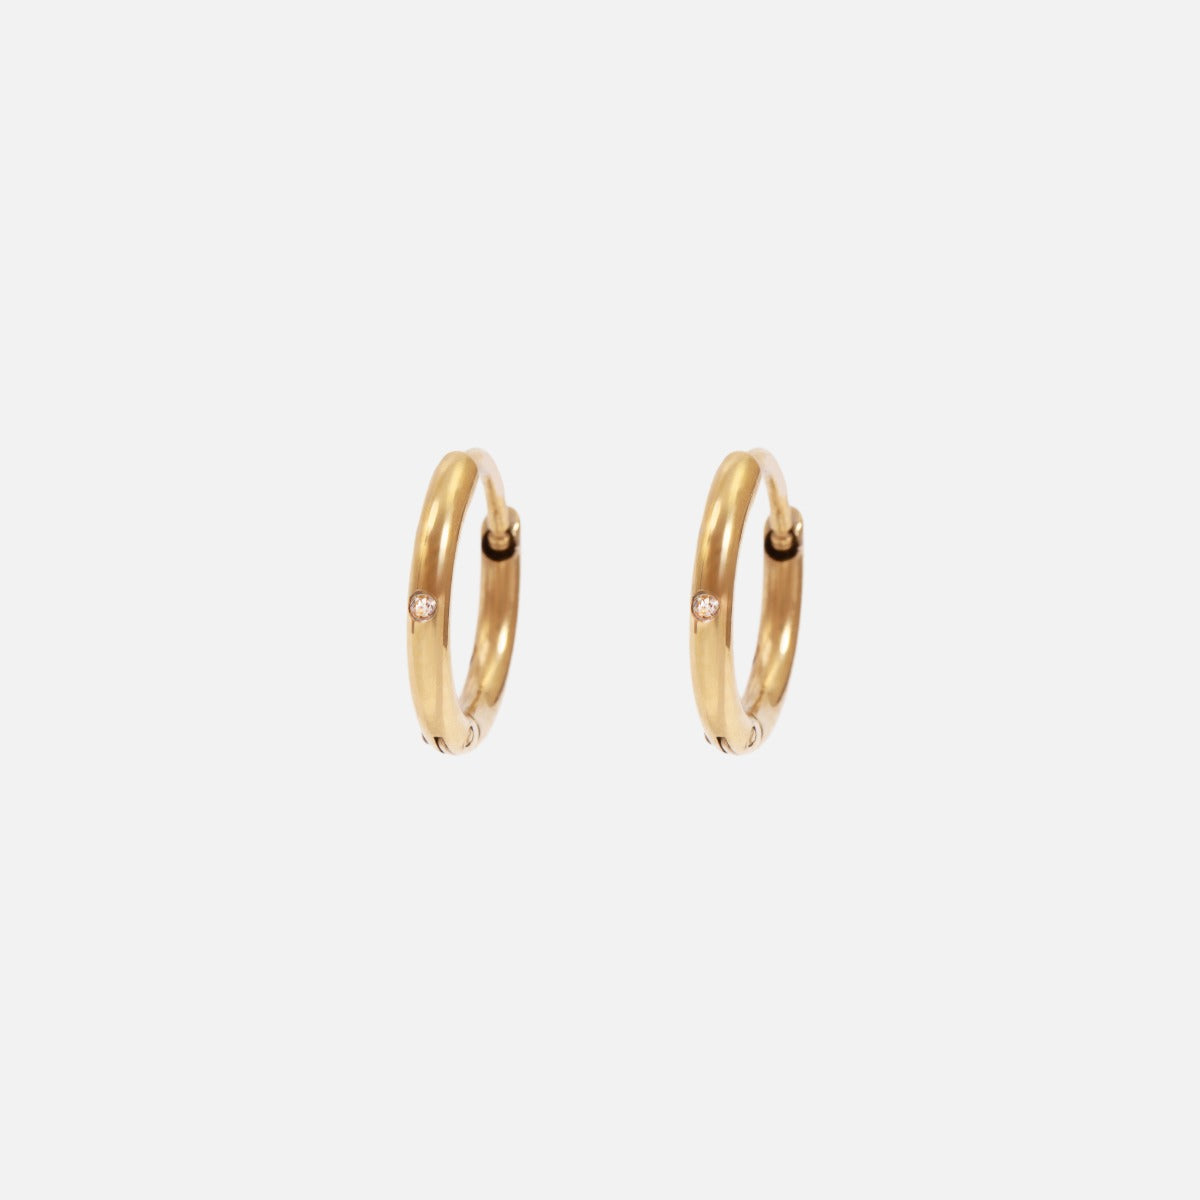 Stainless steel golden hoop earrings with stone insertion